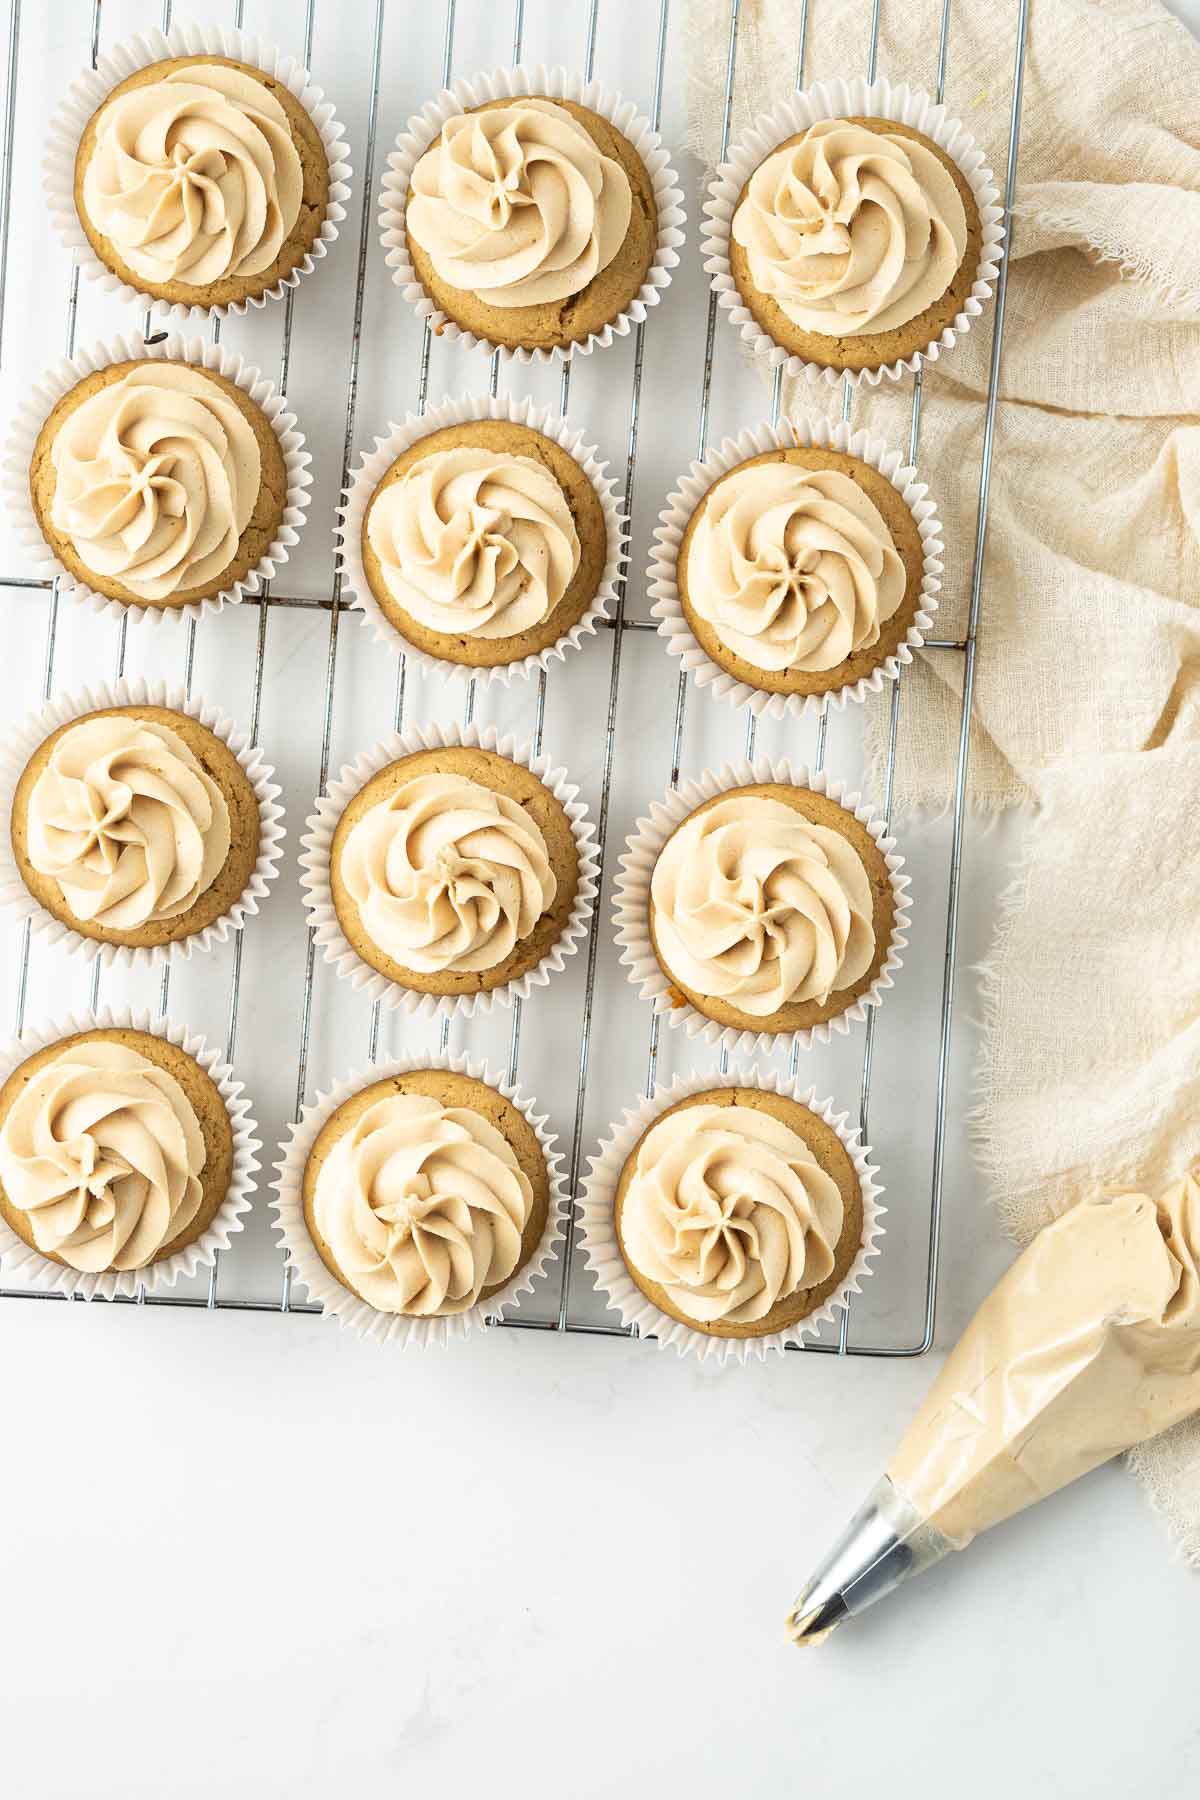 Cupcakes on a wire rack with swirls of biscoff buttercream from above.